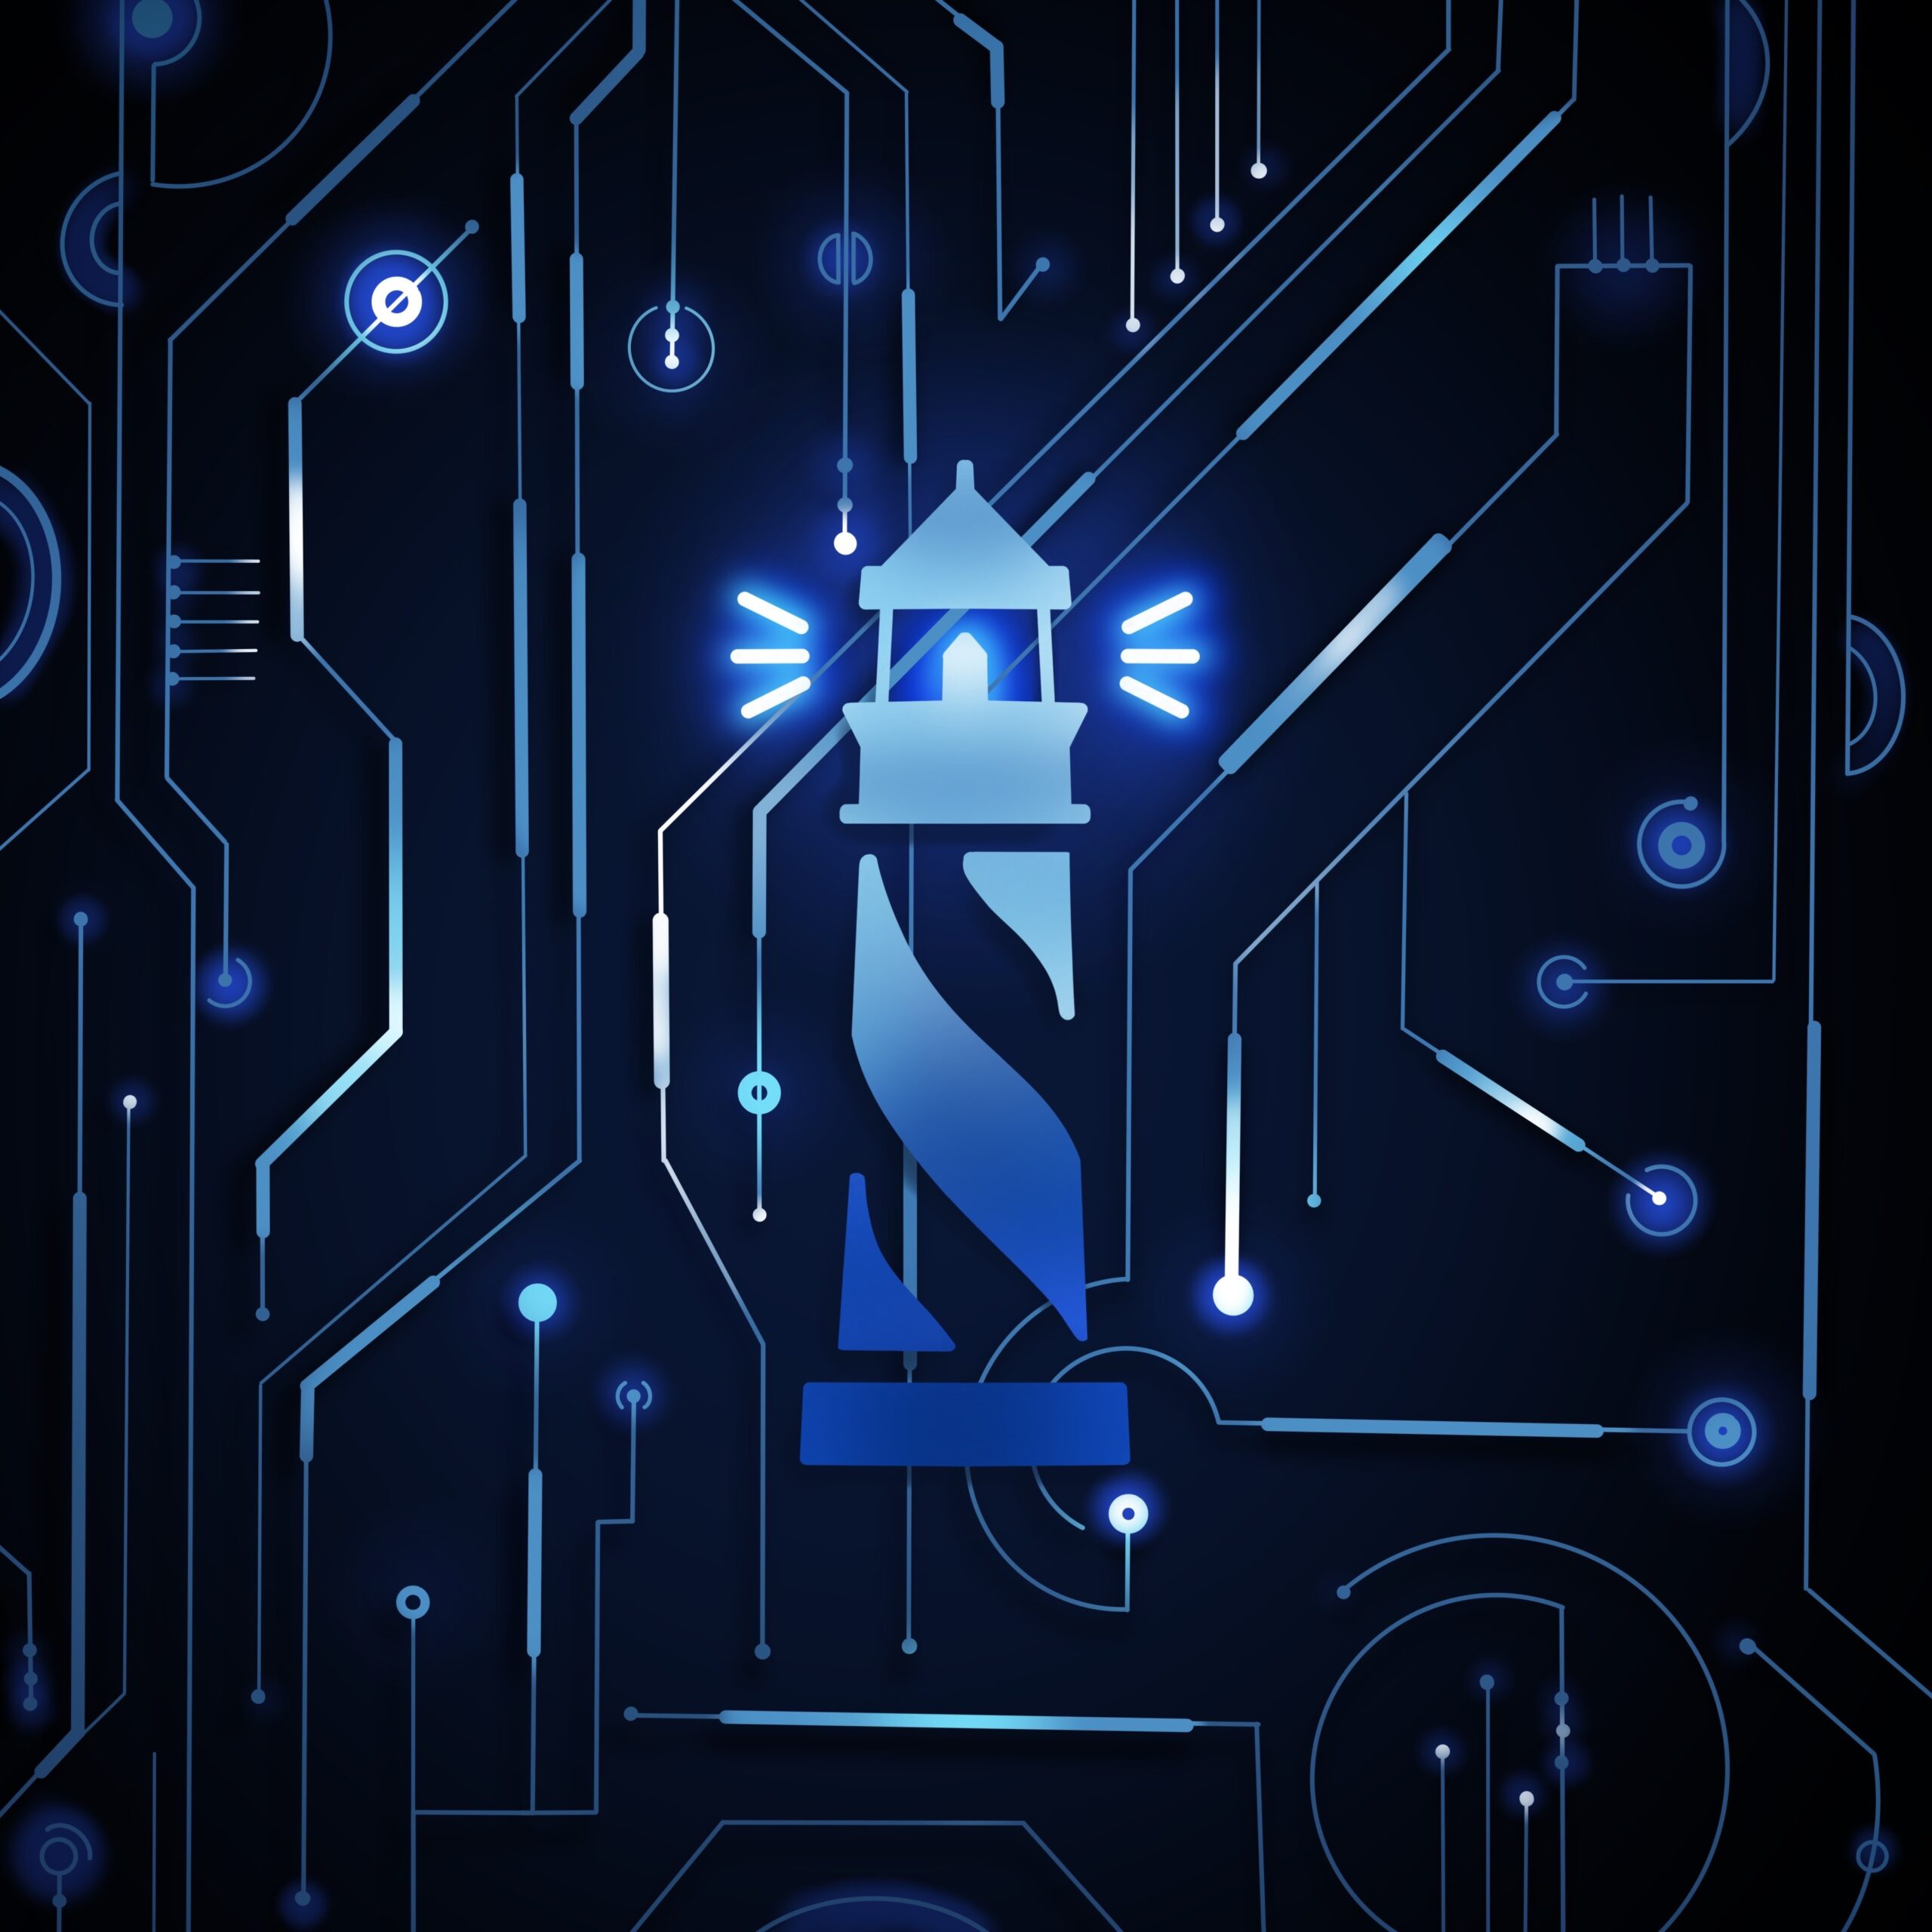 The Navigator logo over a circuit board like design, all in shades of blue.